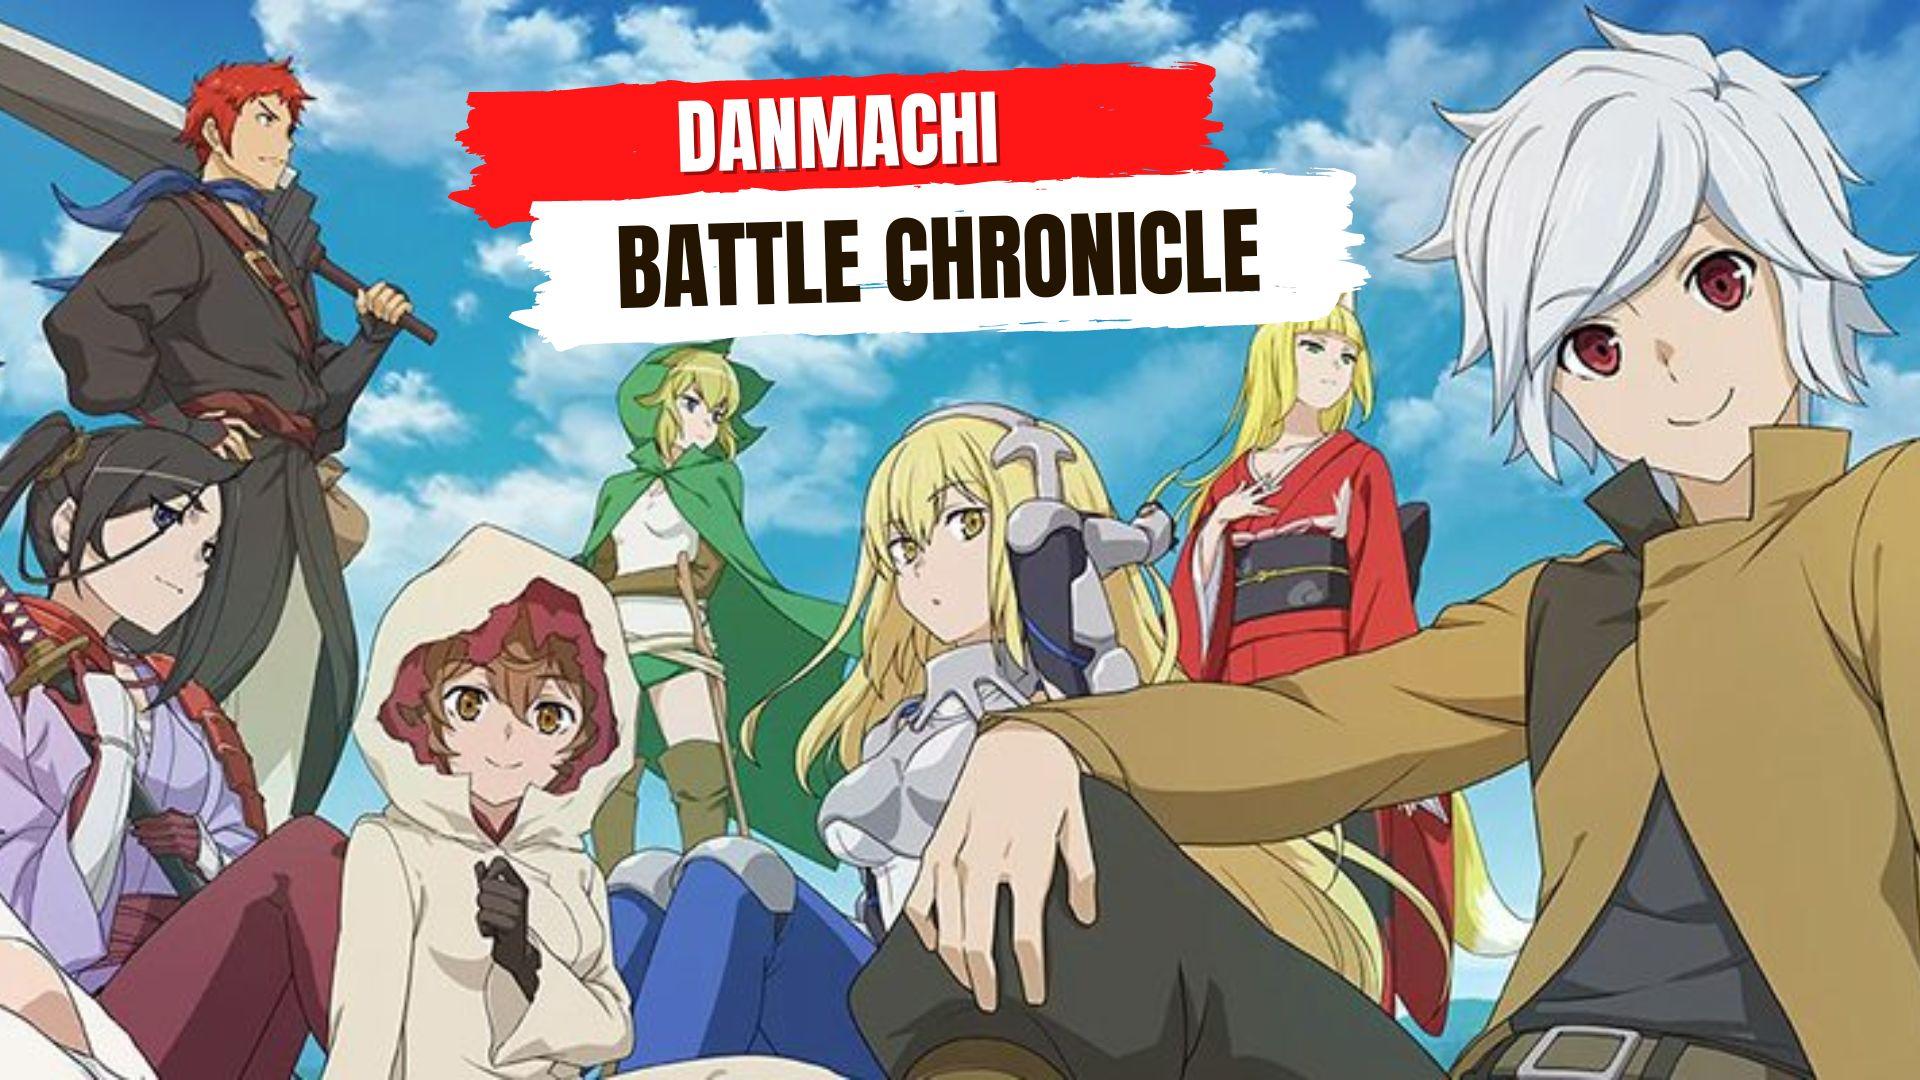 How to Install and Play DanMachi BATTLE CHRONICLE on PC with